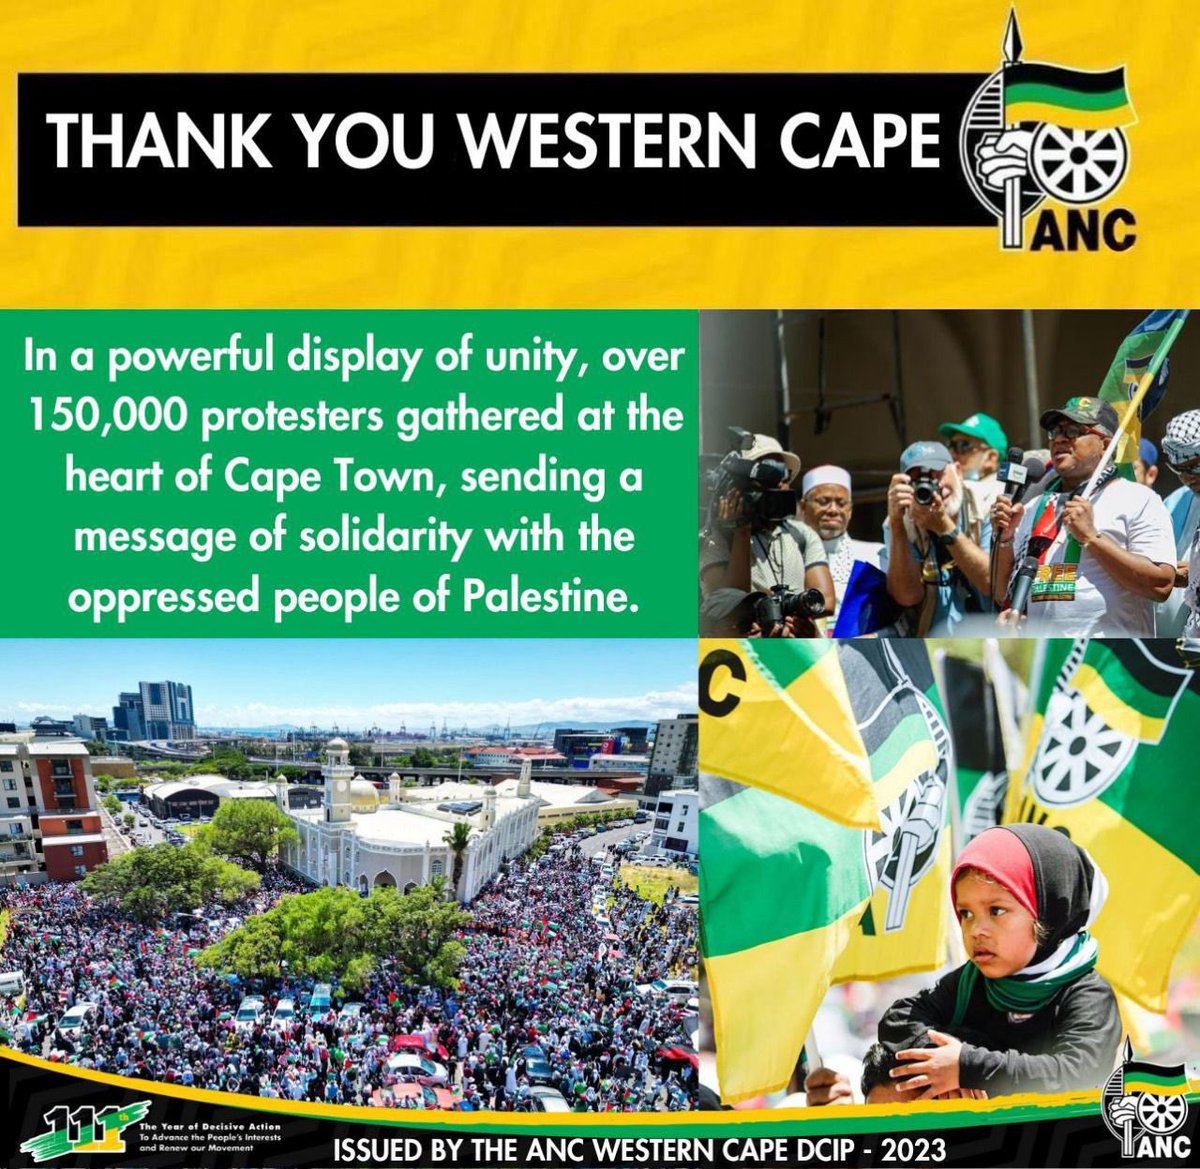 The ANC would like to say thank you to all the people that gathered yesterday and marched in solidarity with the Palestinian people. 

#ANC4Palestine 
#Africa4Palestine 
#World4Palestine 
#ANCStandsWithPalestine 
#FreePalestineFromIsrael